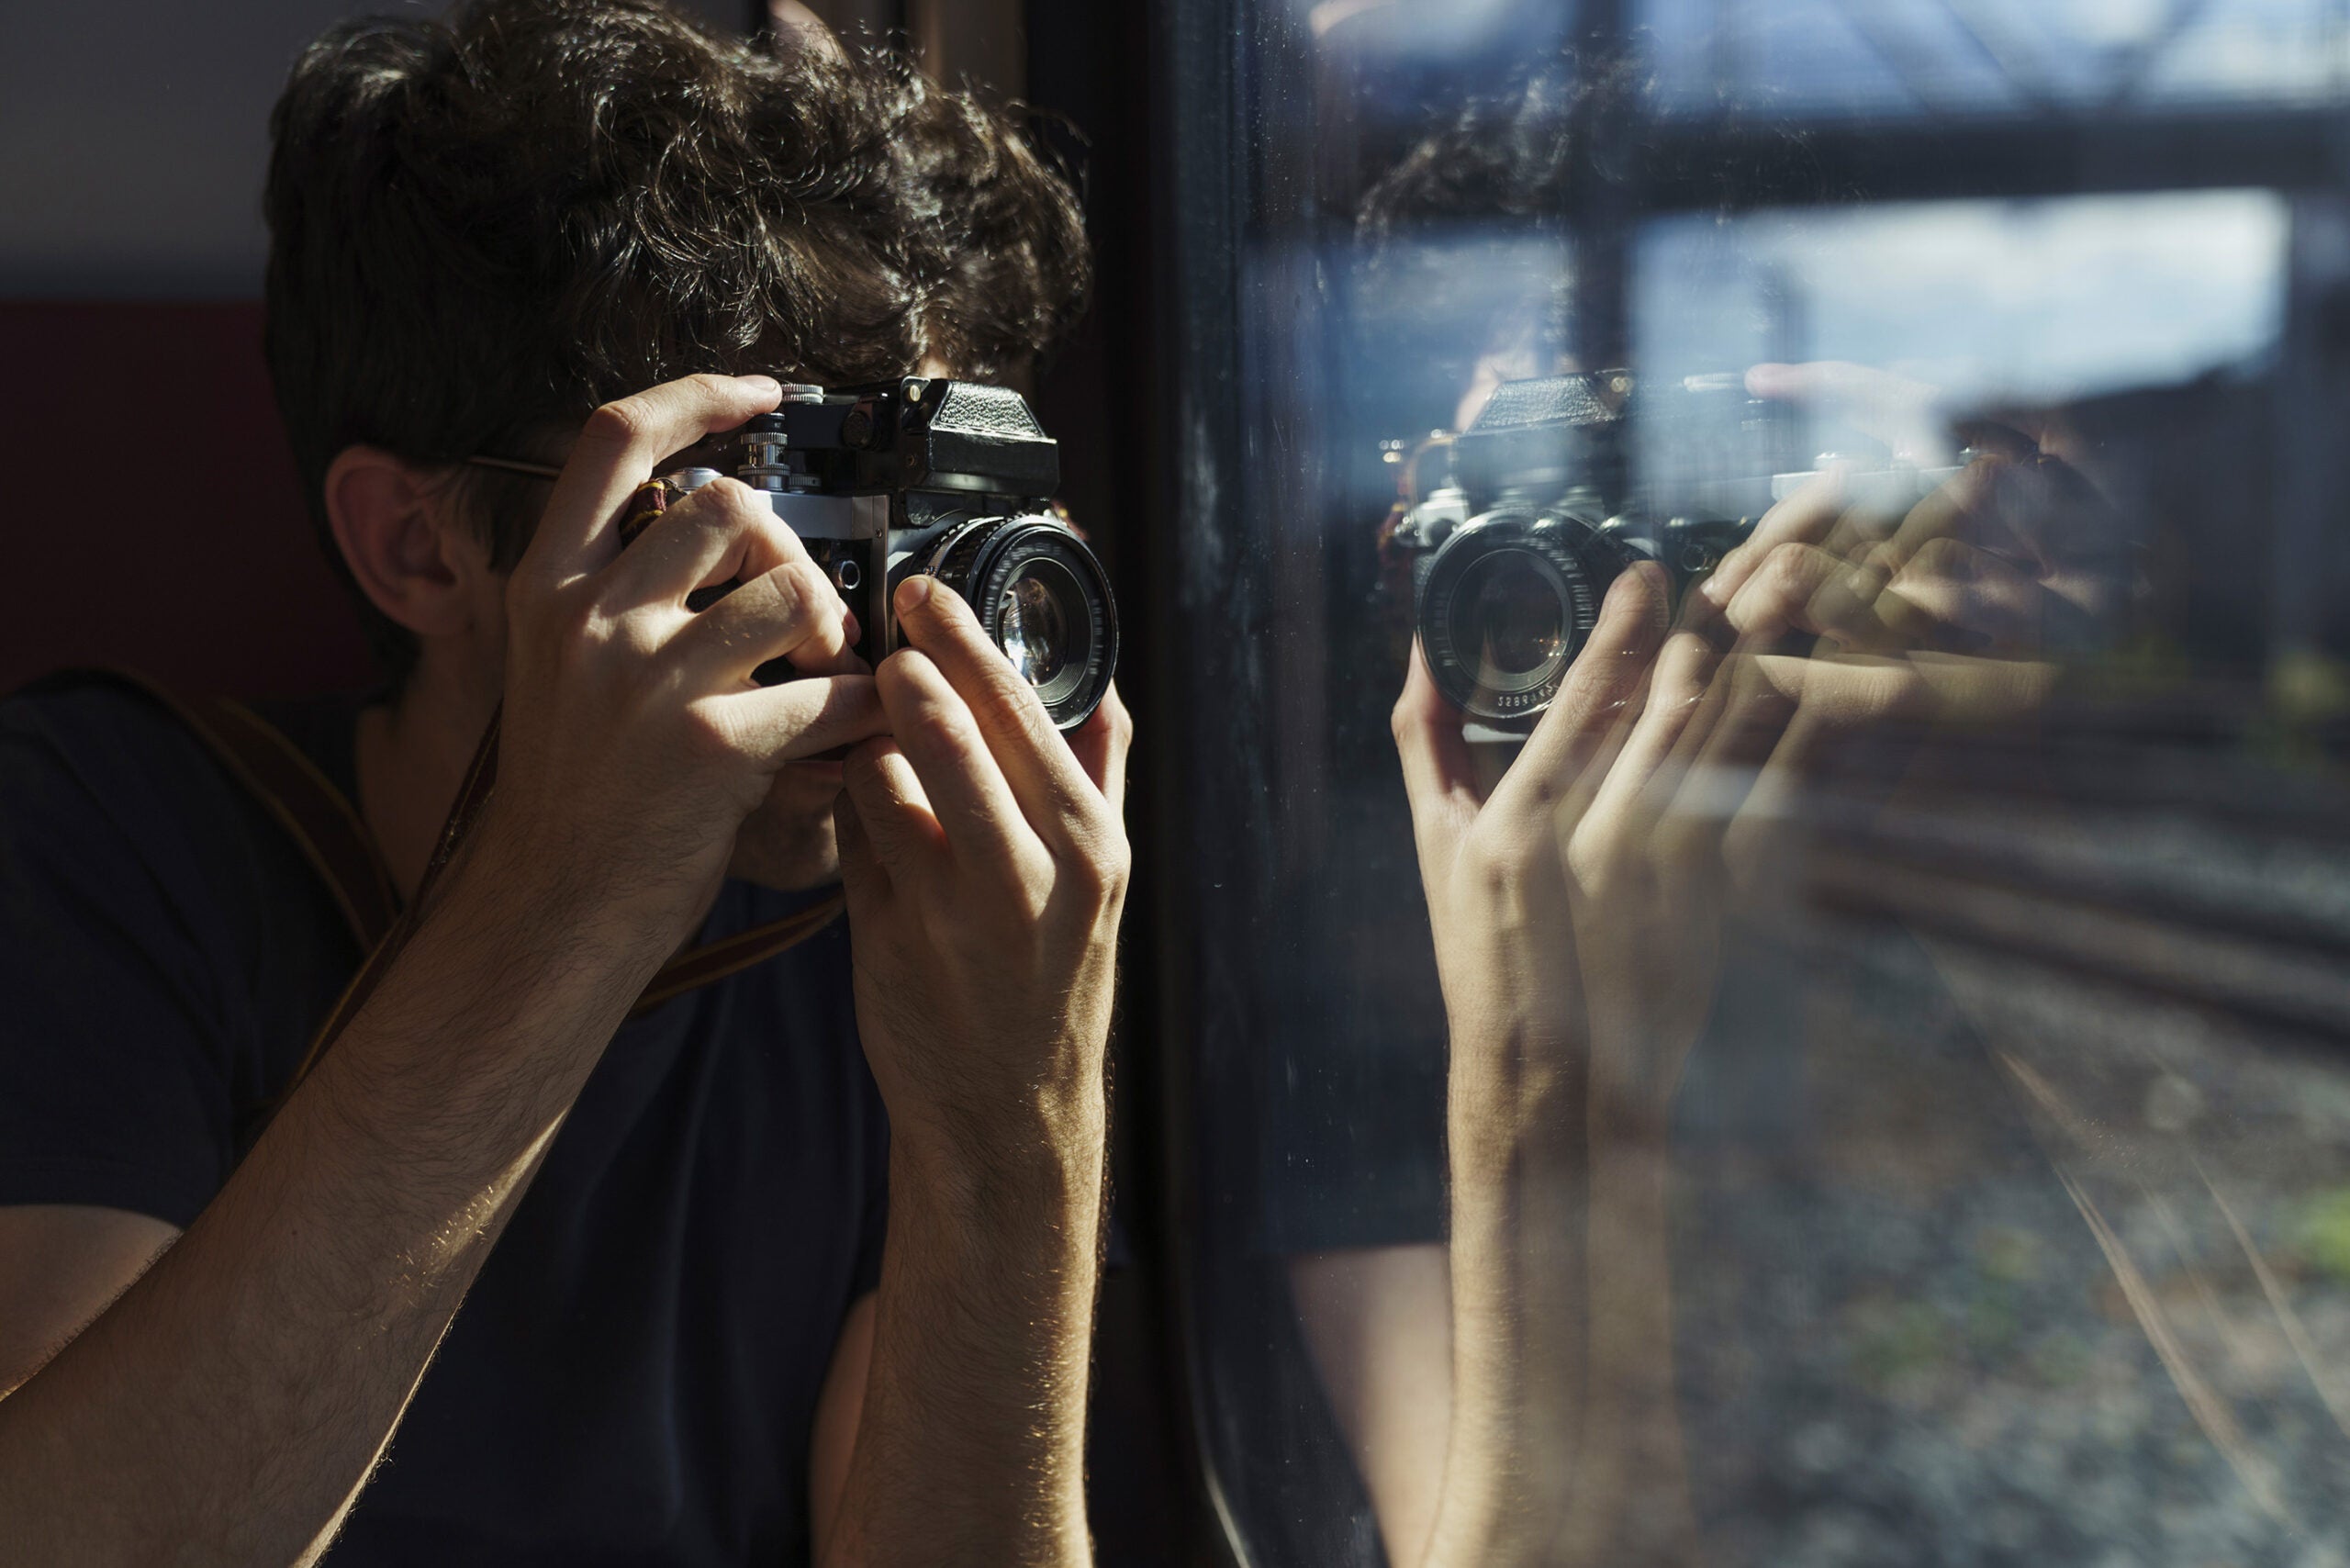 Man traveling by train taking picture with old-fashioned camera